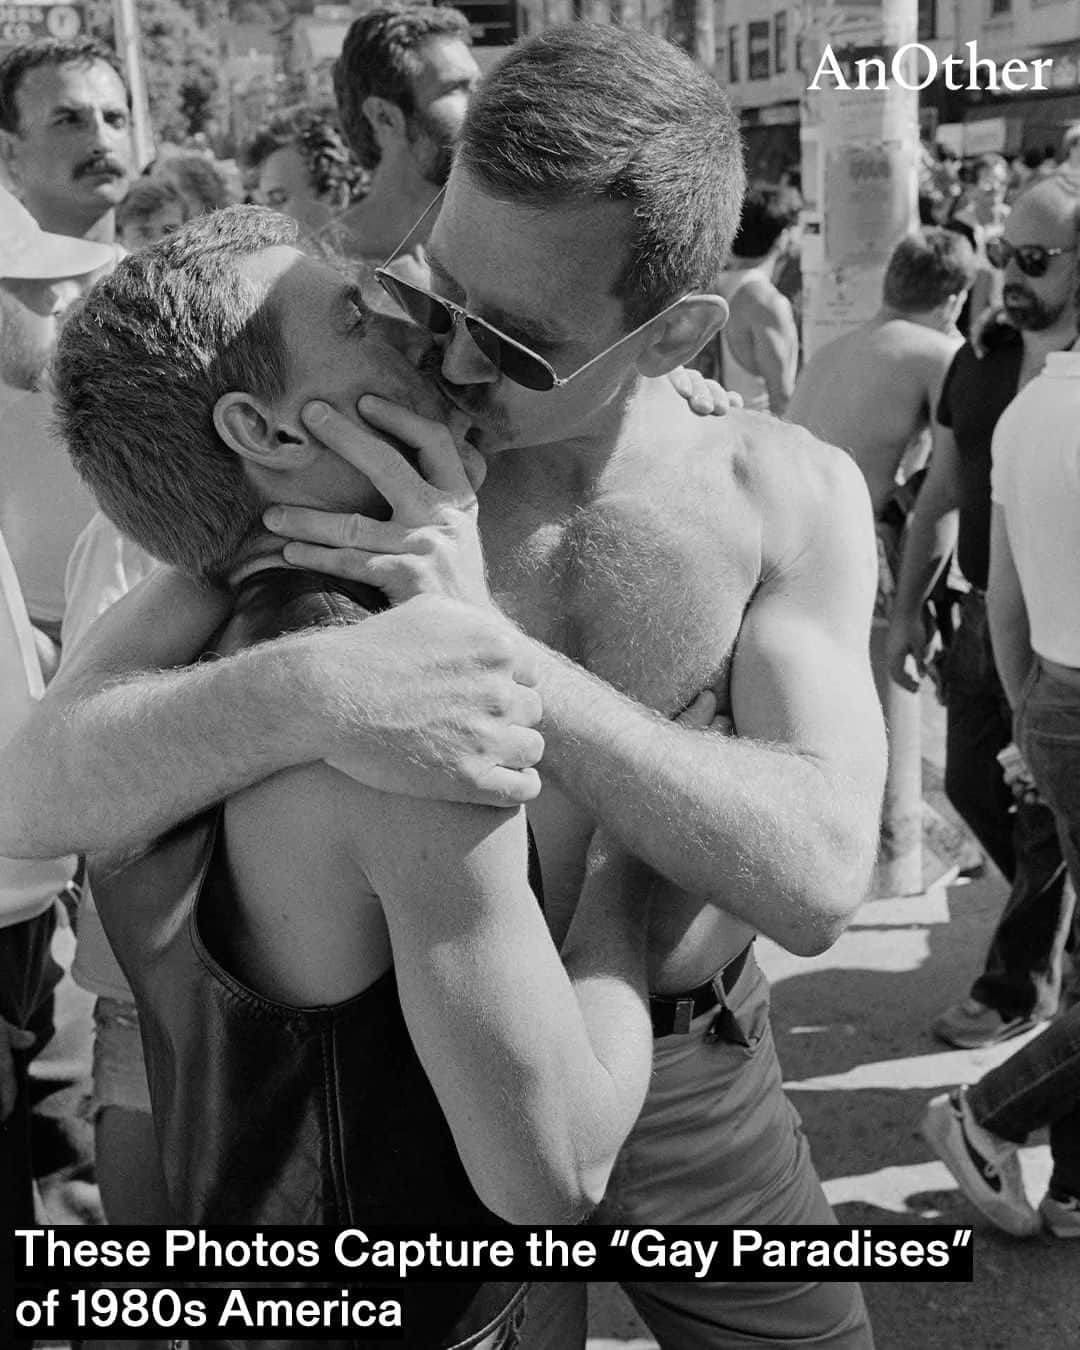 AnOther Magazineのインスタグラム：「"Gay people came from around the country to be there and feel at least a modicum of freedom," Nicholas Blair tells AnOther. "I hope [this] book gives viewers a sense of what it was like to walk those streets at that time" ❤️⁠ ⁠ As his new book is released, Blair talks to @madeleine.pollard about capturing the heat and hedonism of the queer communities in 1980s San Francisco and New York. Read about the period, in his own words, at the link in bio 📲⁠ ⁠ 📸 Gay Streets of America 1979–1986 by #NicholasBlair⁠」